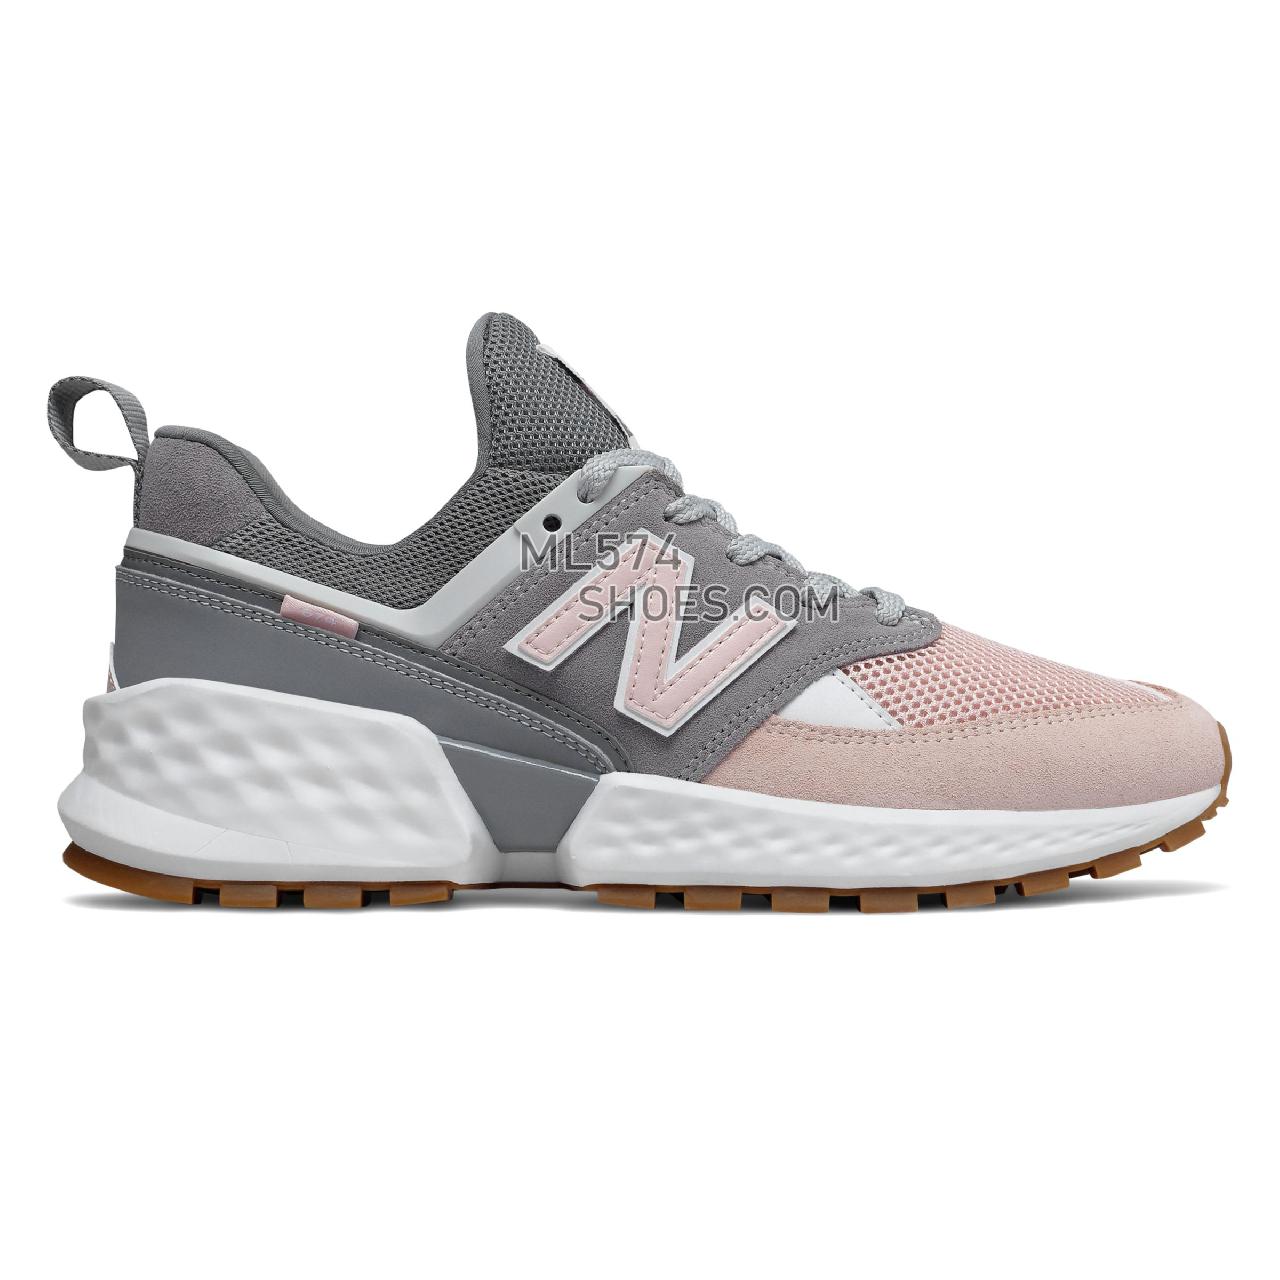 New Balance 574 Sport - Men's Sport Style Sneakers - Gunmetal with Oyster Pink - MS574JUC